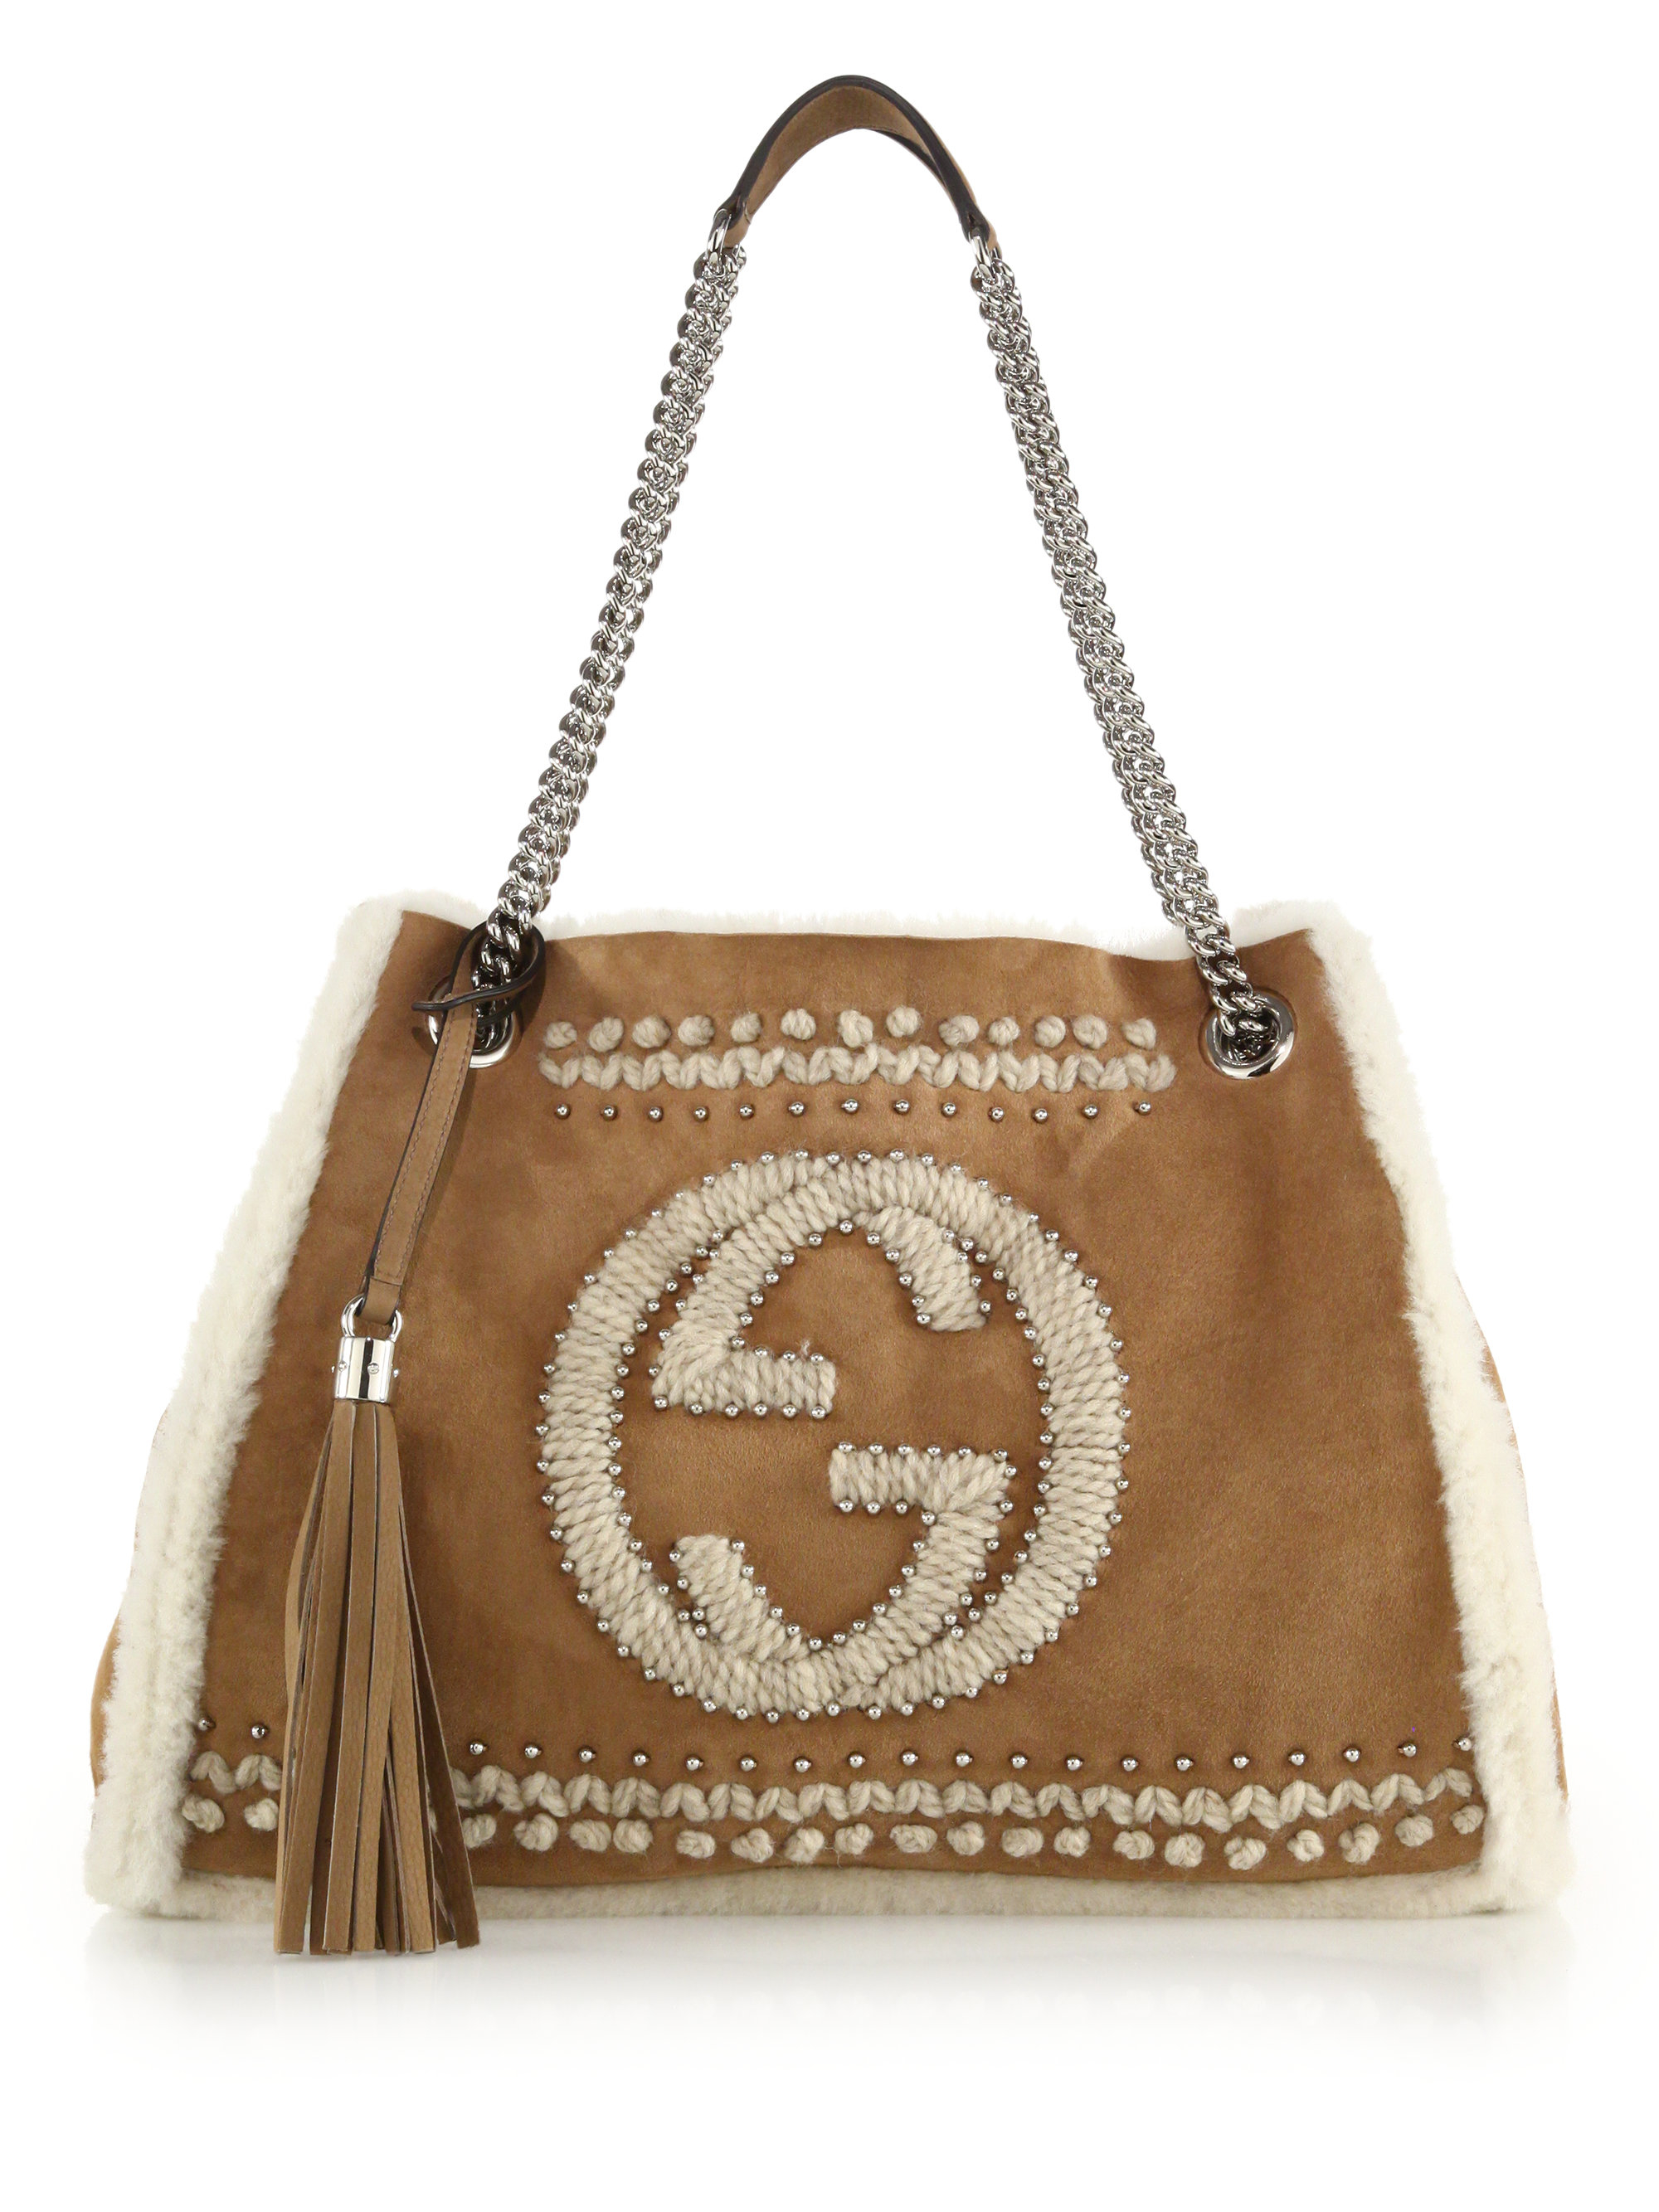 Lyst - Gucci Soho Chain Shearling Shoulder Bag in Brown